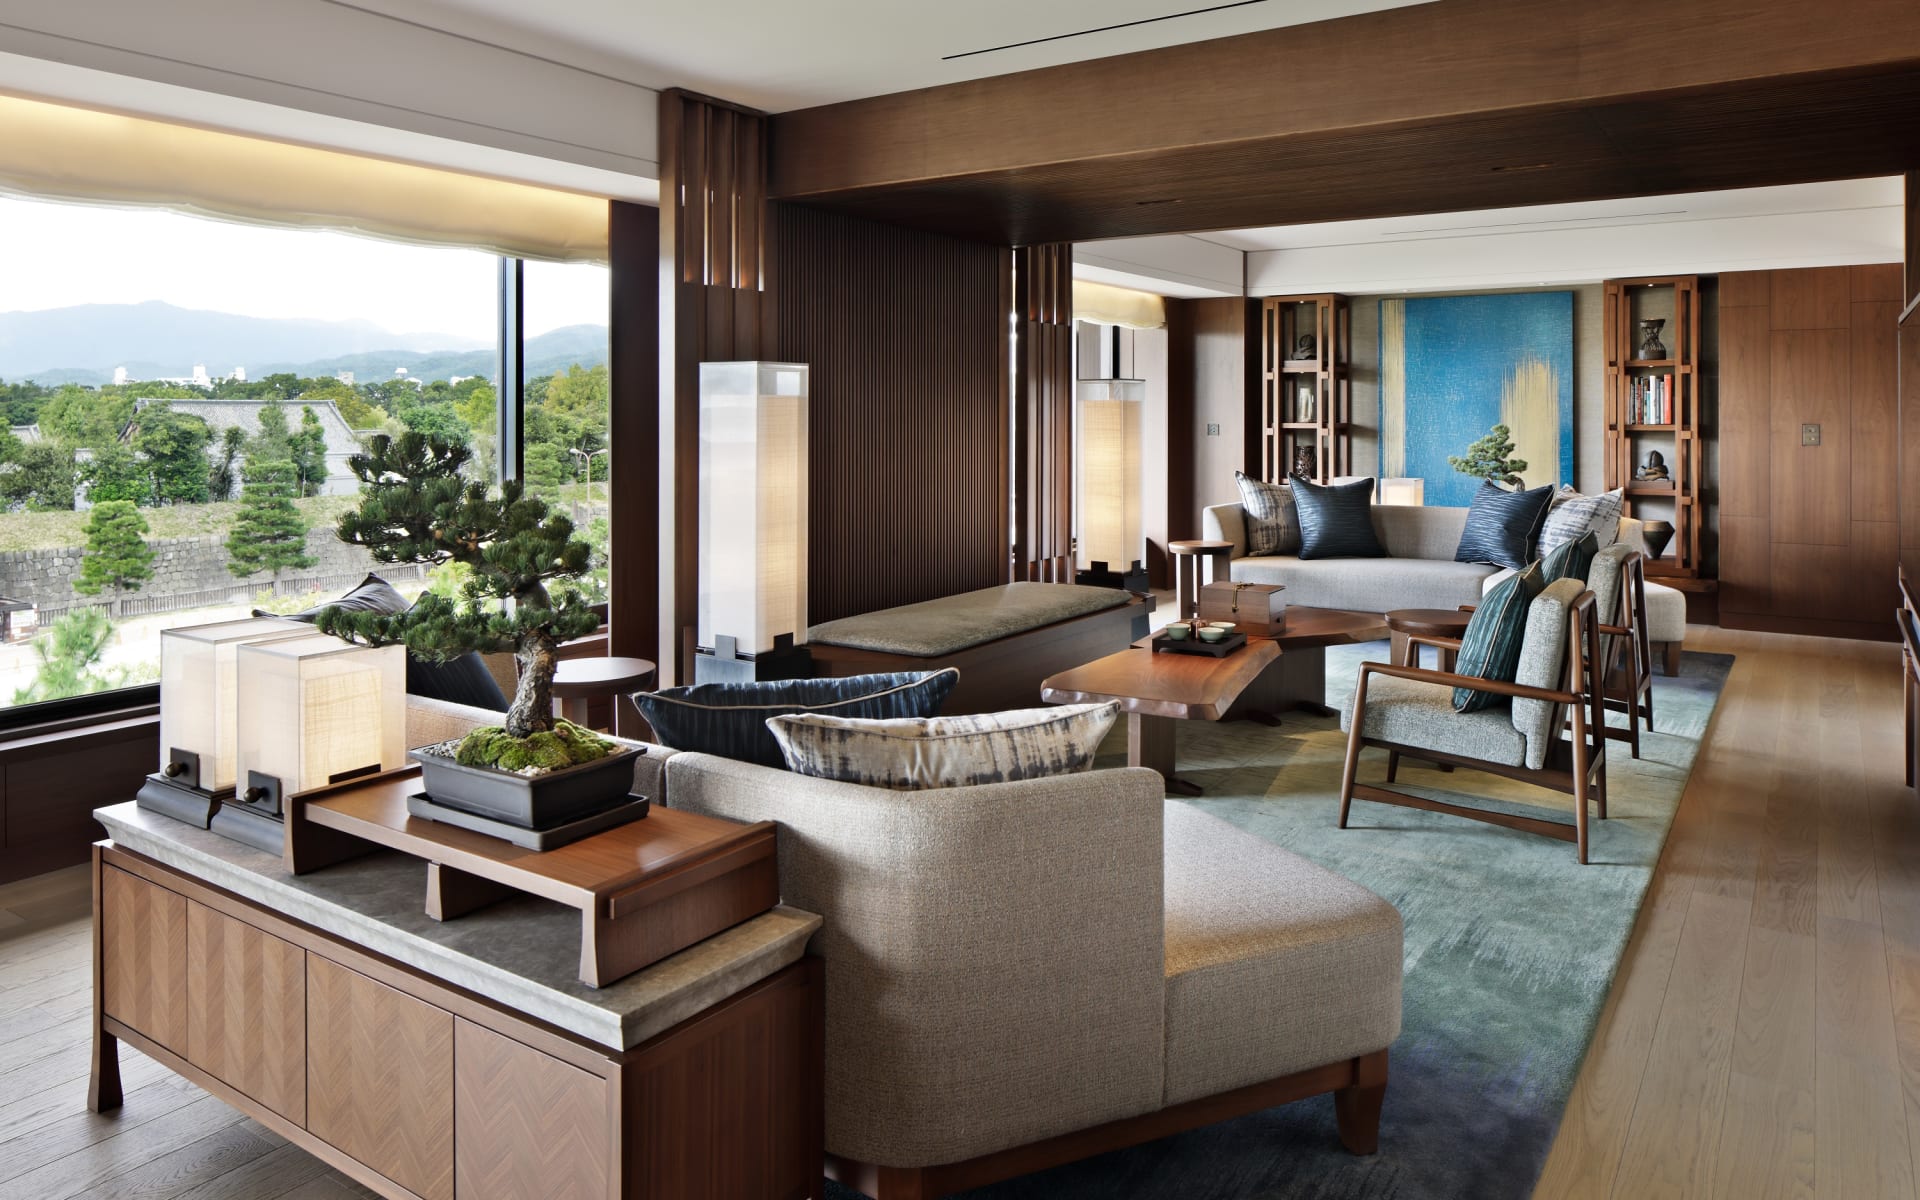 The living room in the presidential suite has floor-to-ceiling windows, lots of seating and lighting. 